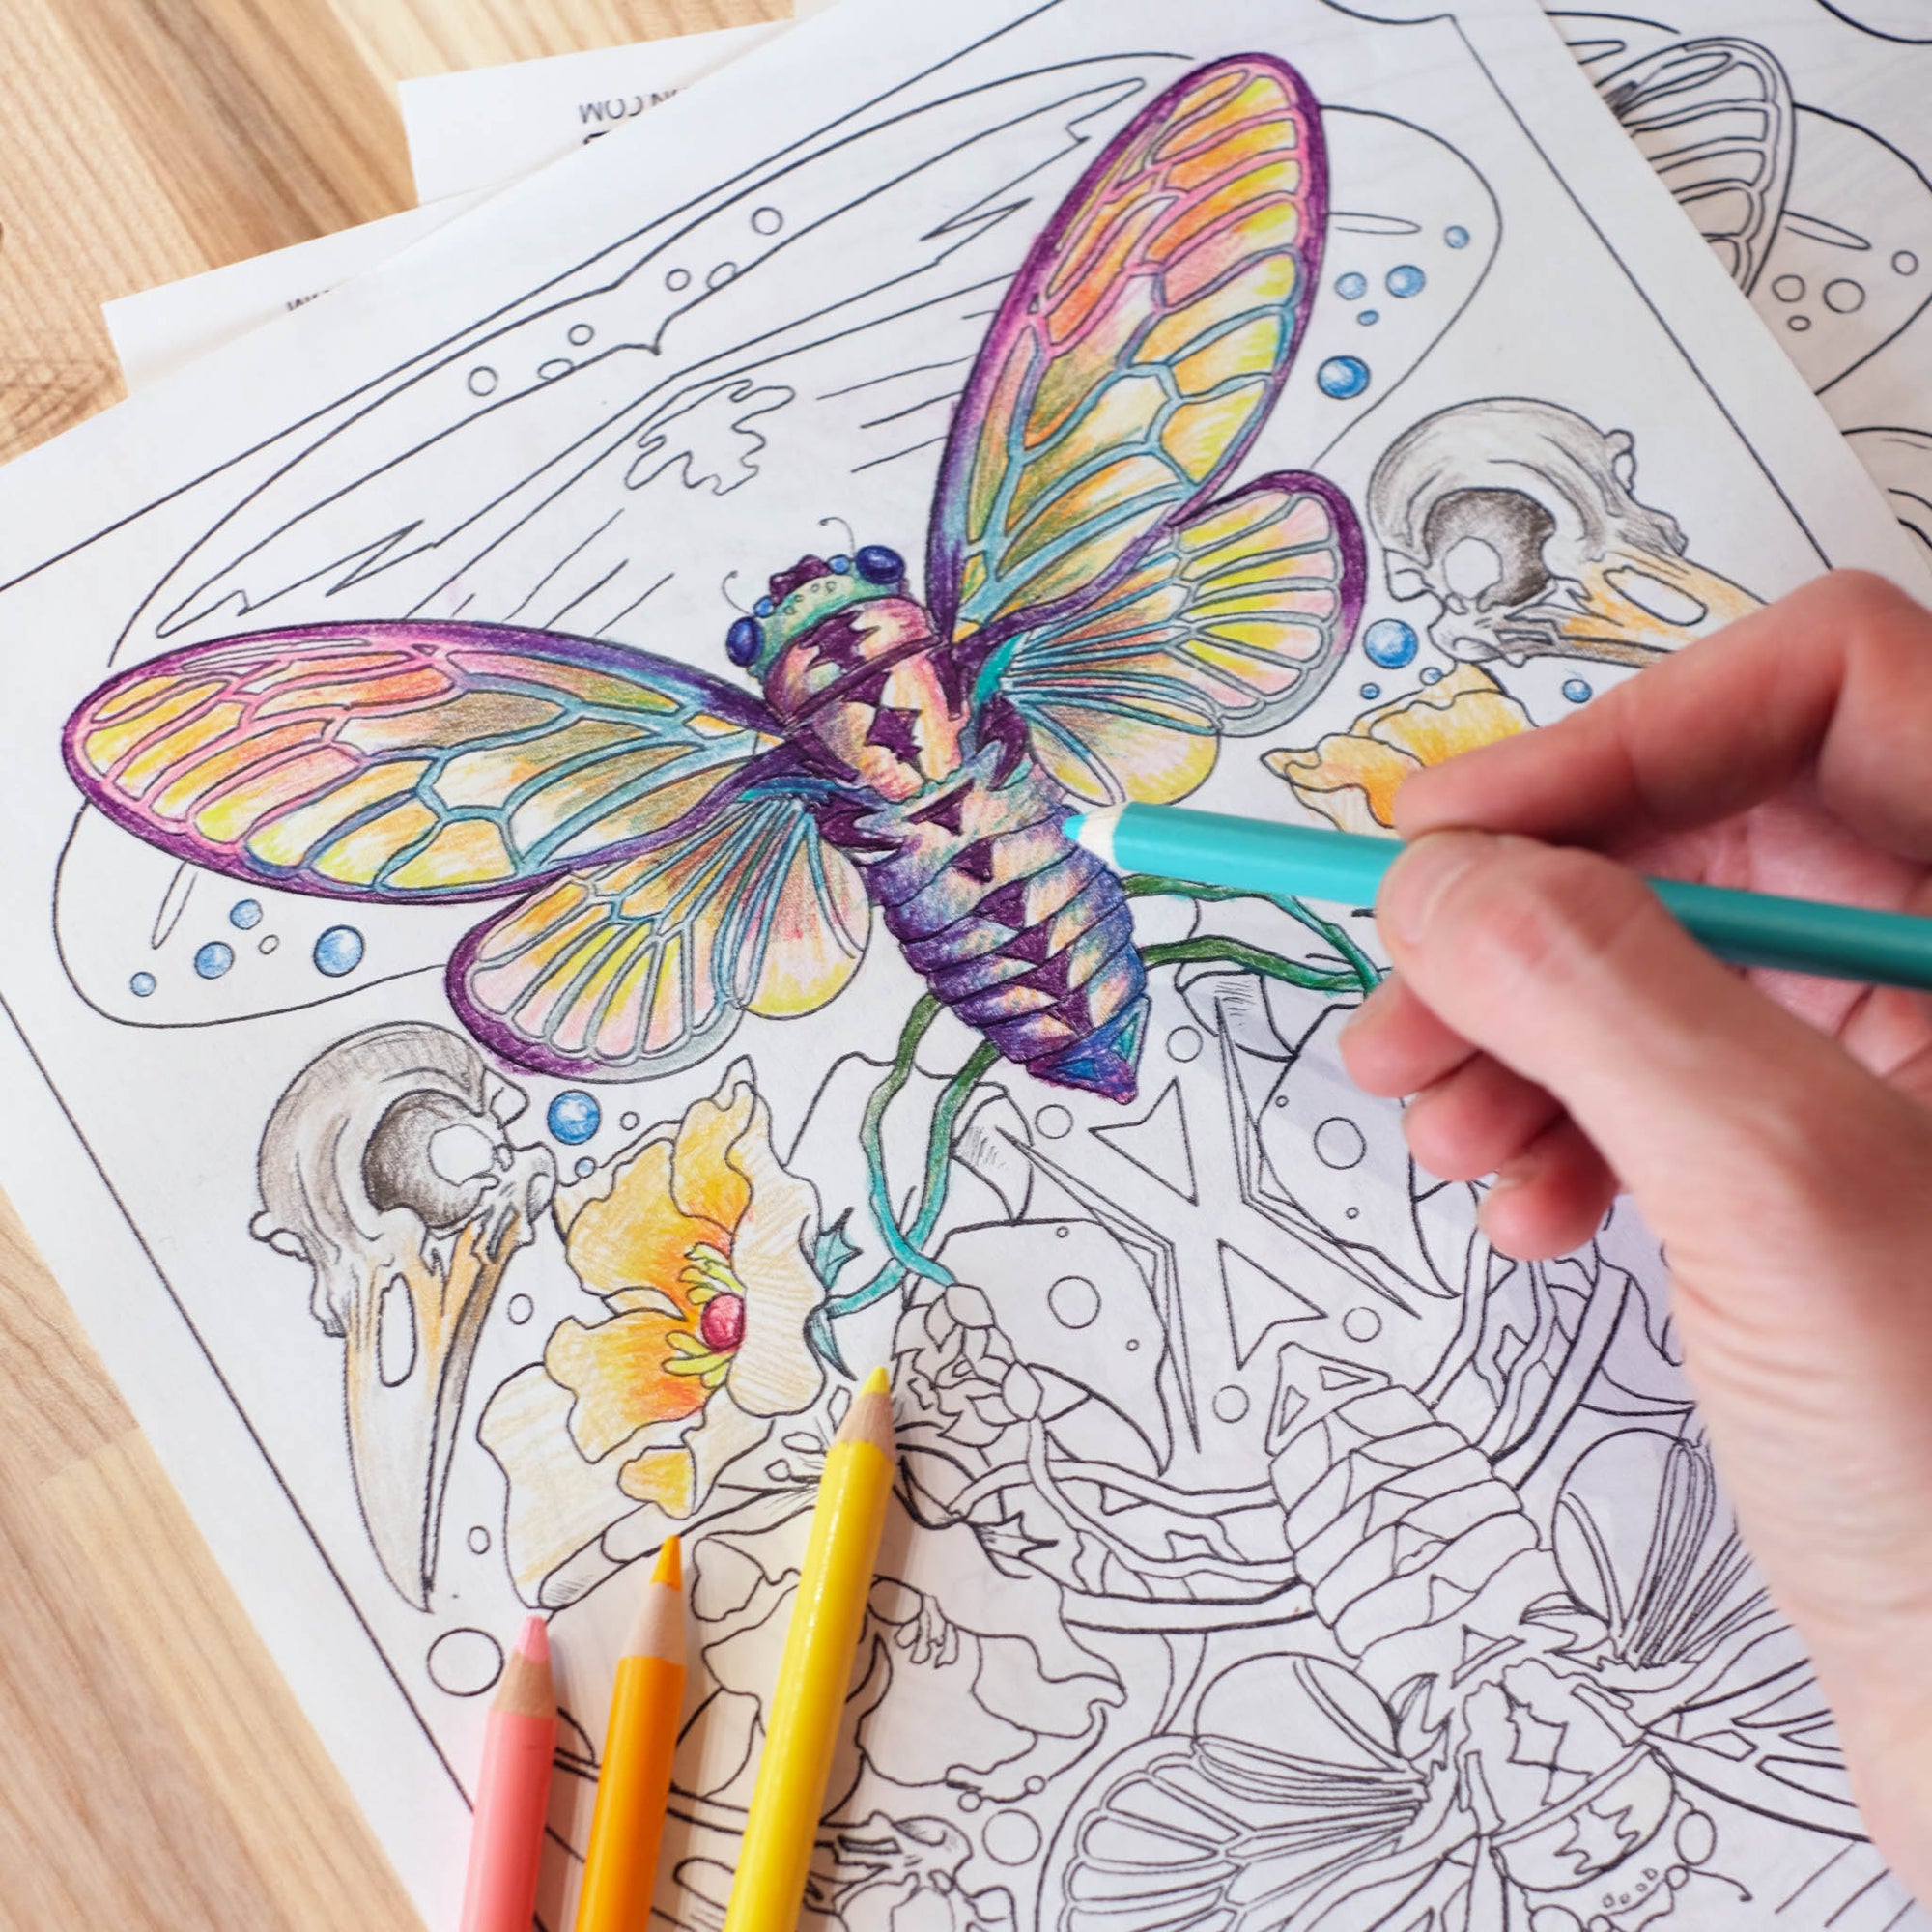 Free Coloring Book Page!